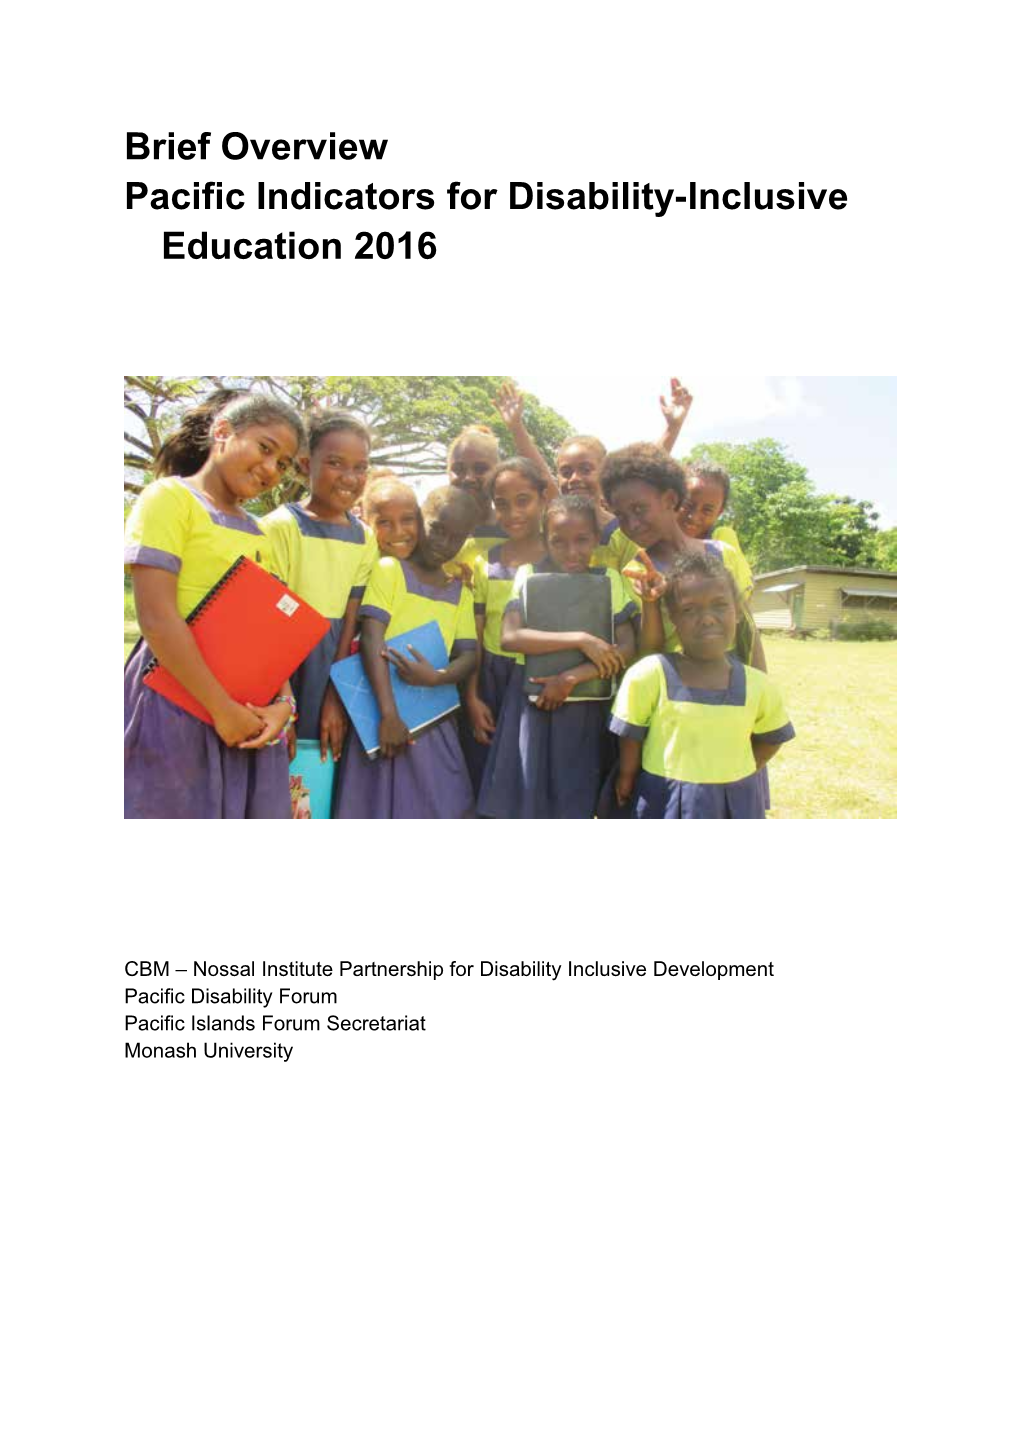 Brief Overview Pacific Indicators for Disability-Inclusive Education 2016